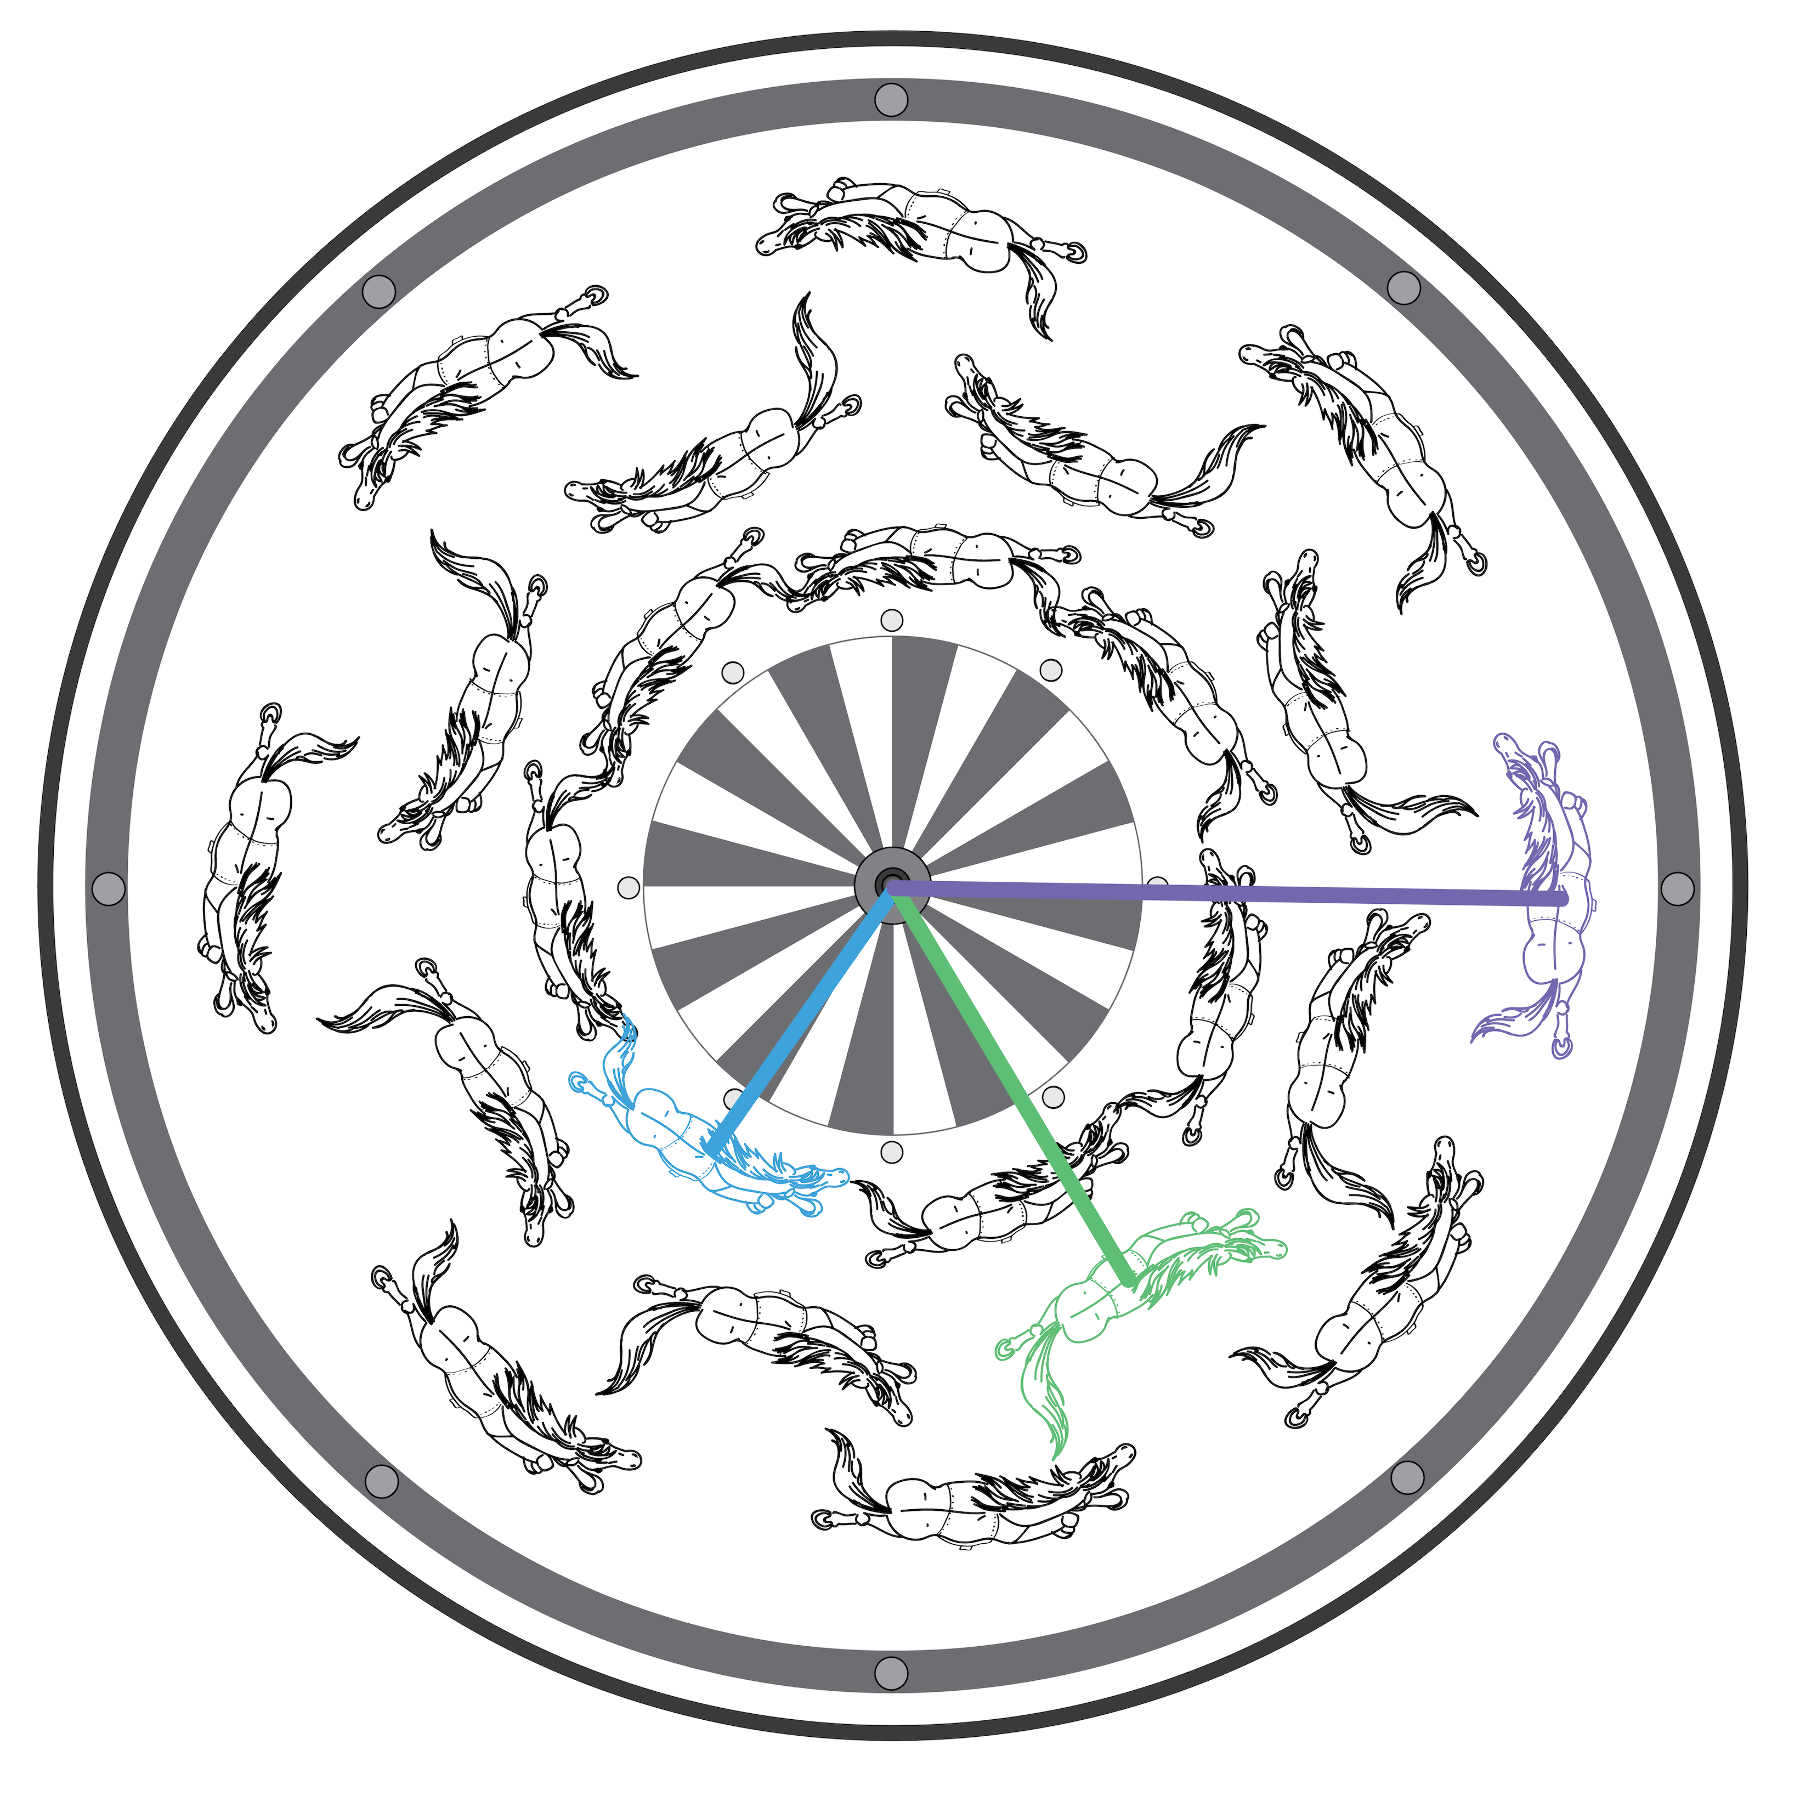 Here’s a picture of this merry-go-round ride! Notice that the different radii for the blue, green, and purple horses. How will that affect their linear and rotational velocities? image credit Mariya Krastanova